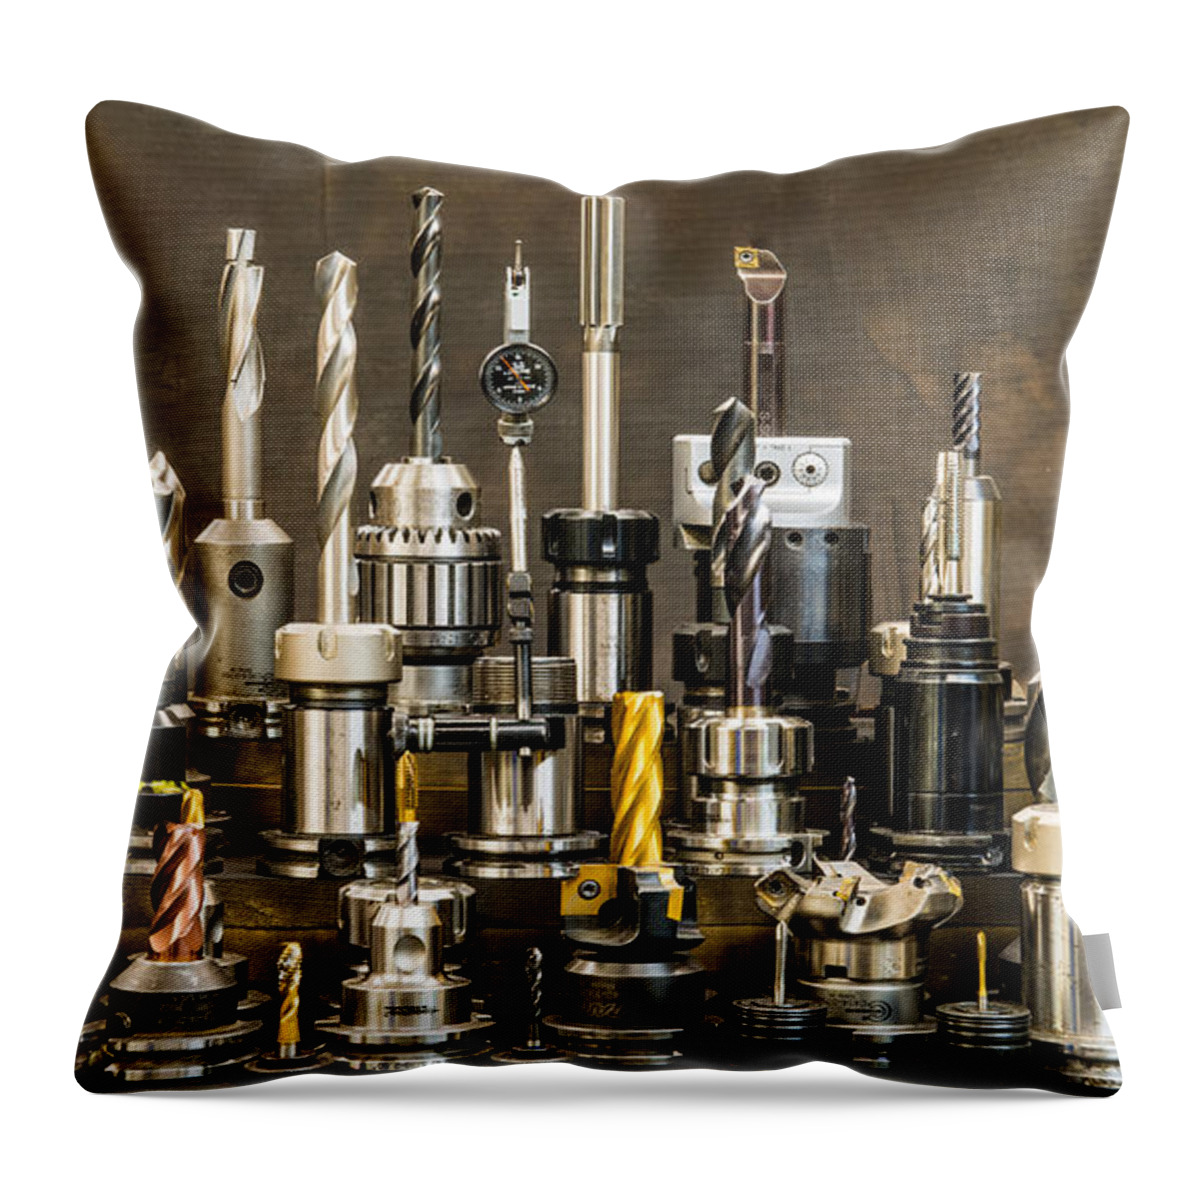 Freidlund Throw Pillow featuring the photograph Toolmakers Cutting Tools by Paul Freidlund